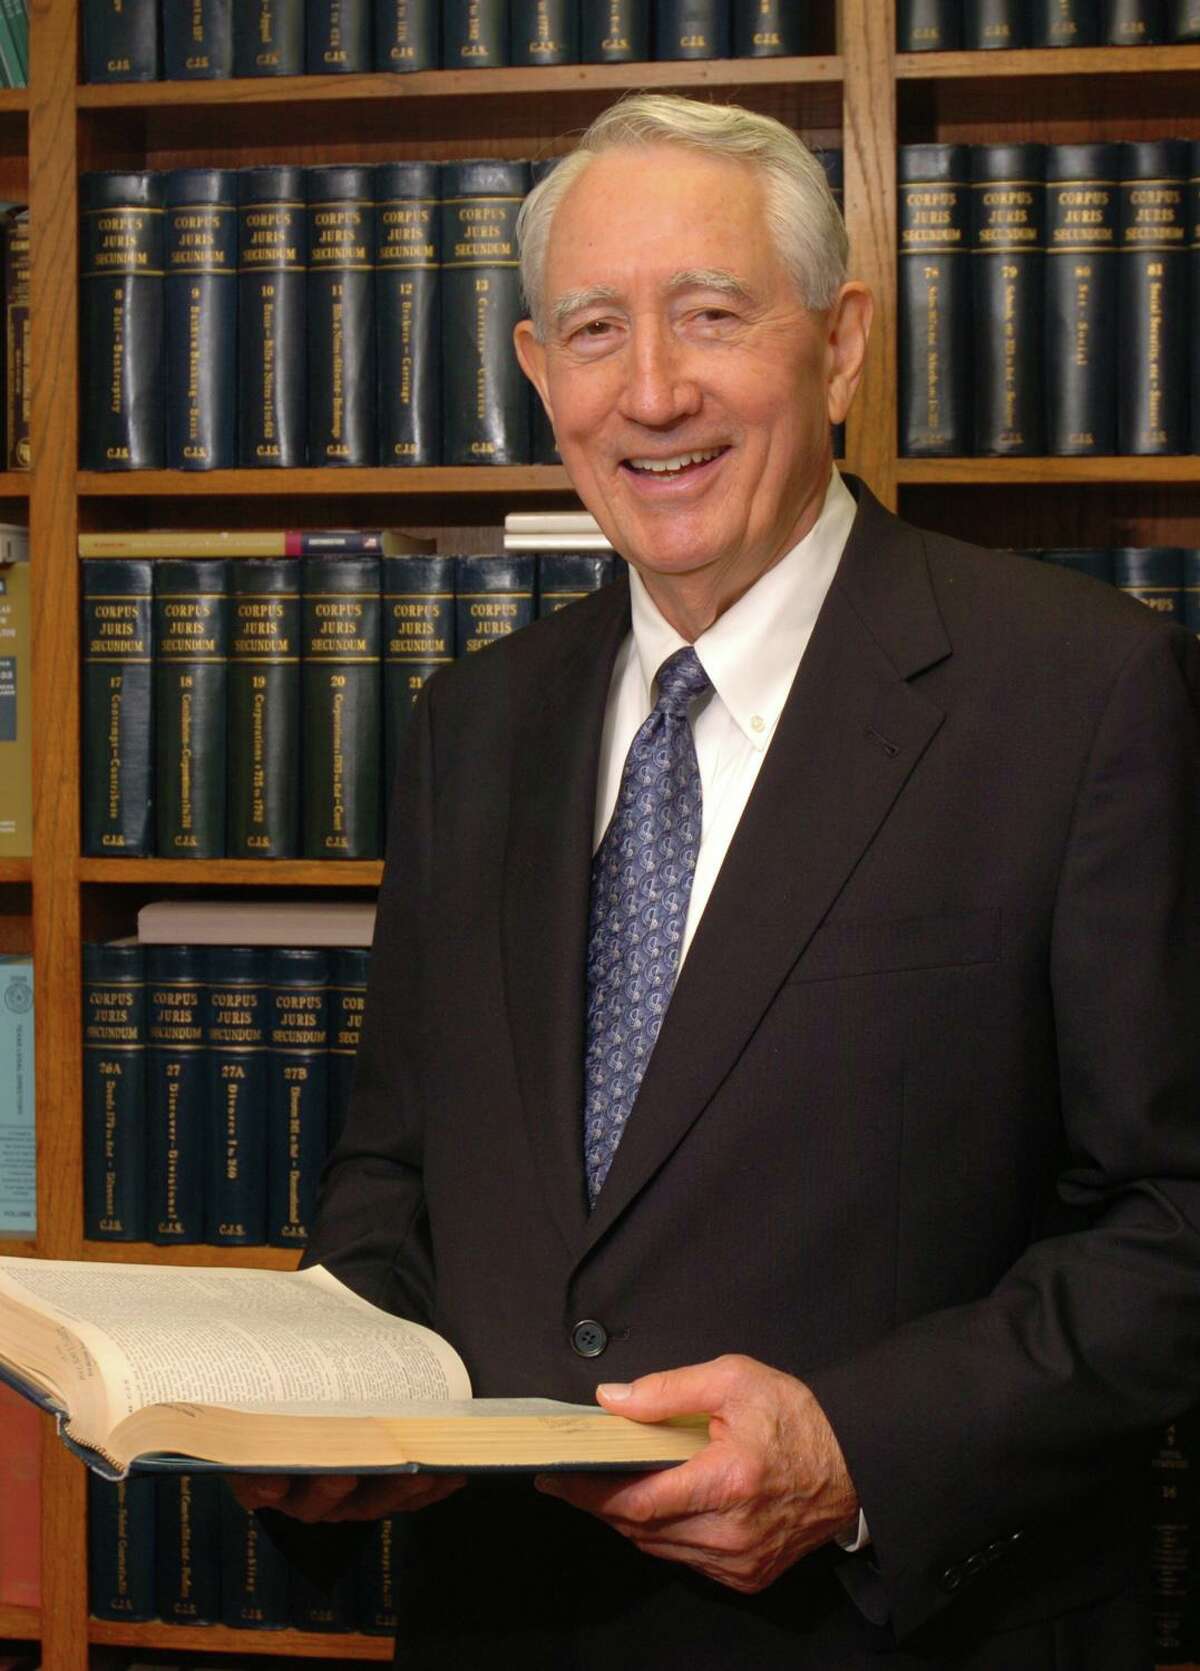 Conroe attorney Mickey Deison died on Tuesday at age 89.